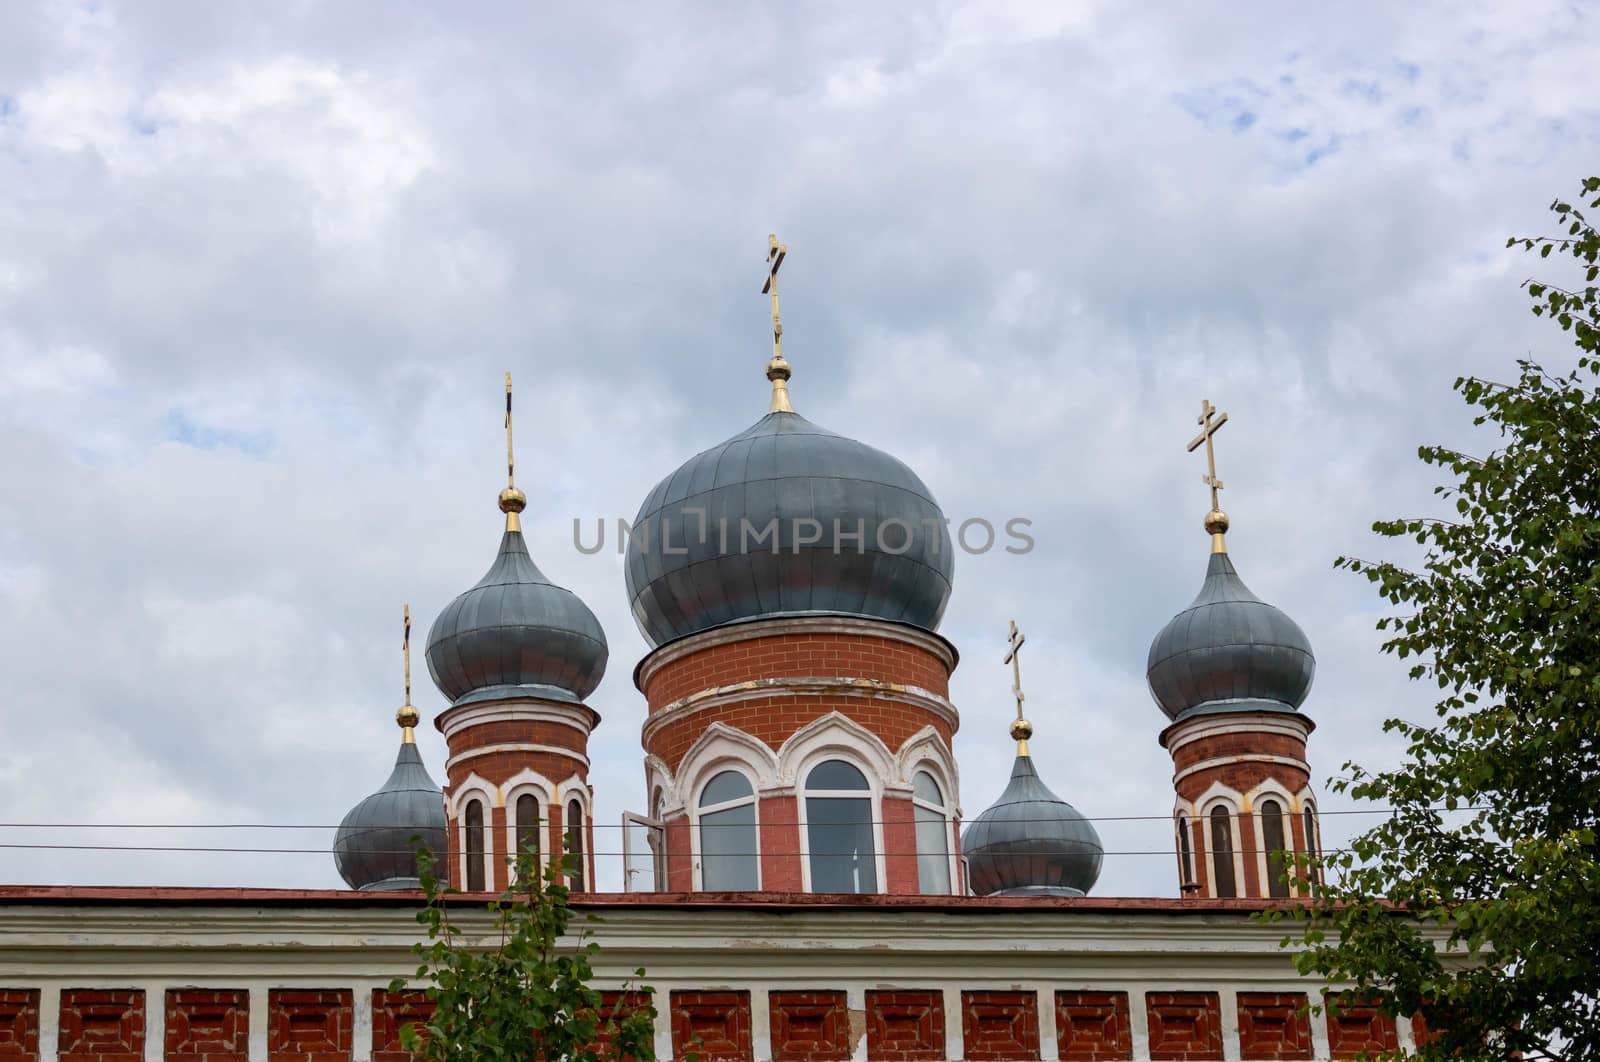 Grey domes with crosses of the Orthodox Church against a cloudy blue sky by lapushka62